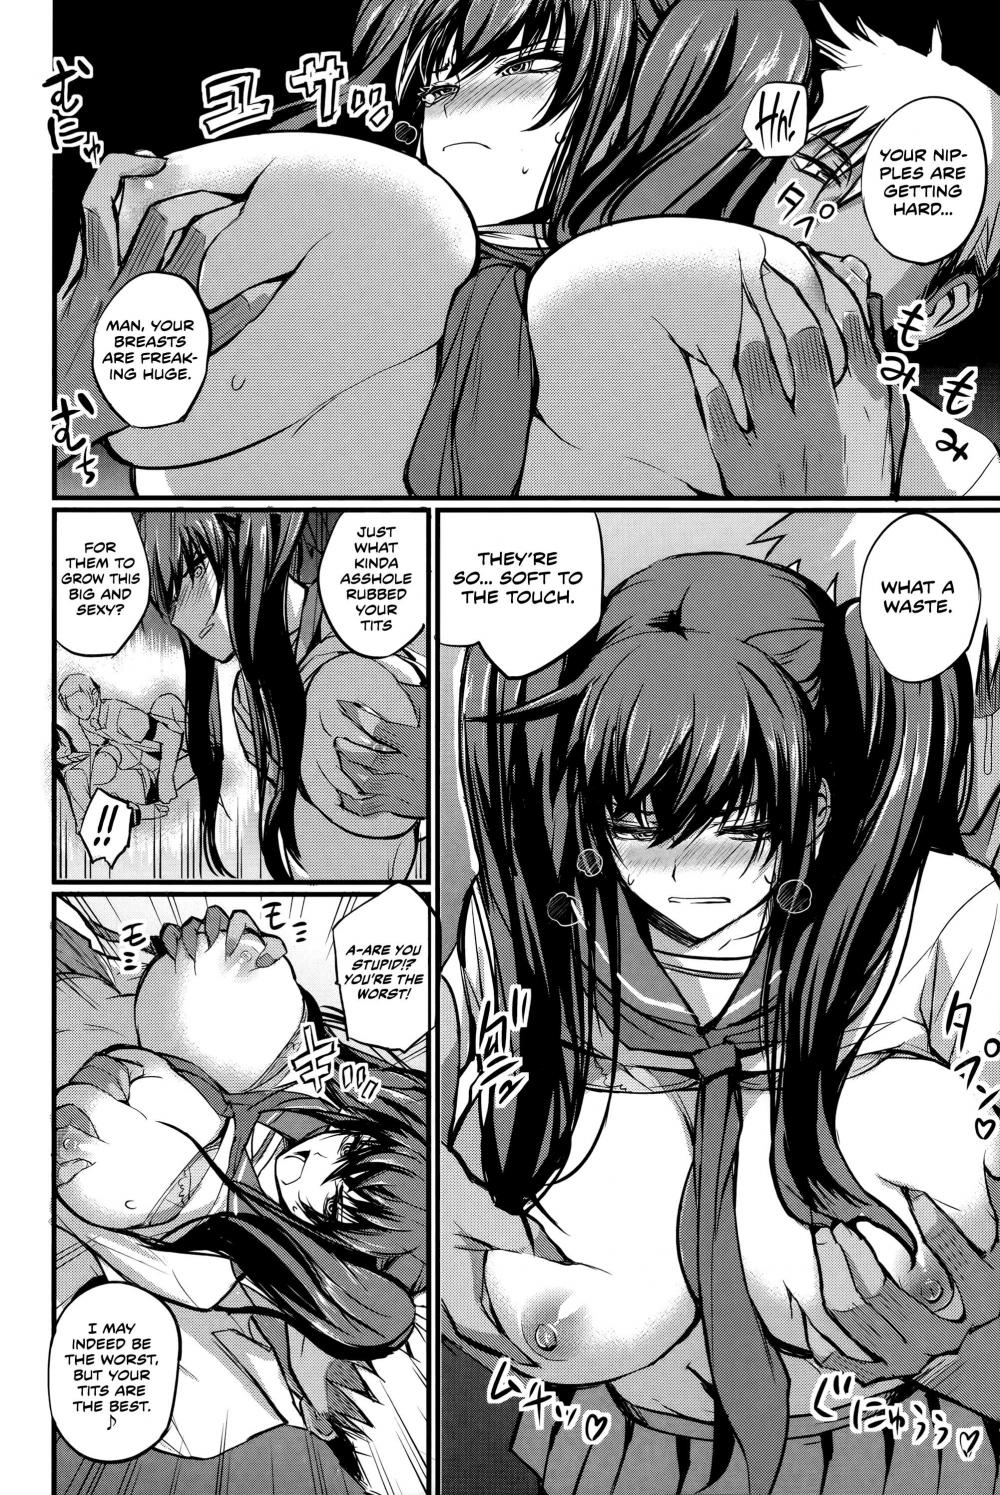 Hentai Manga Comic-How To Stop A Suicide-Read-8